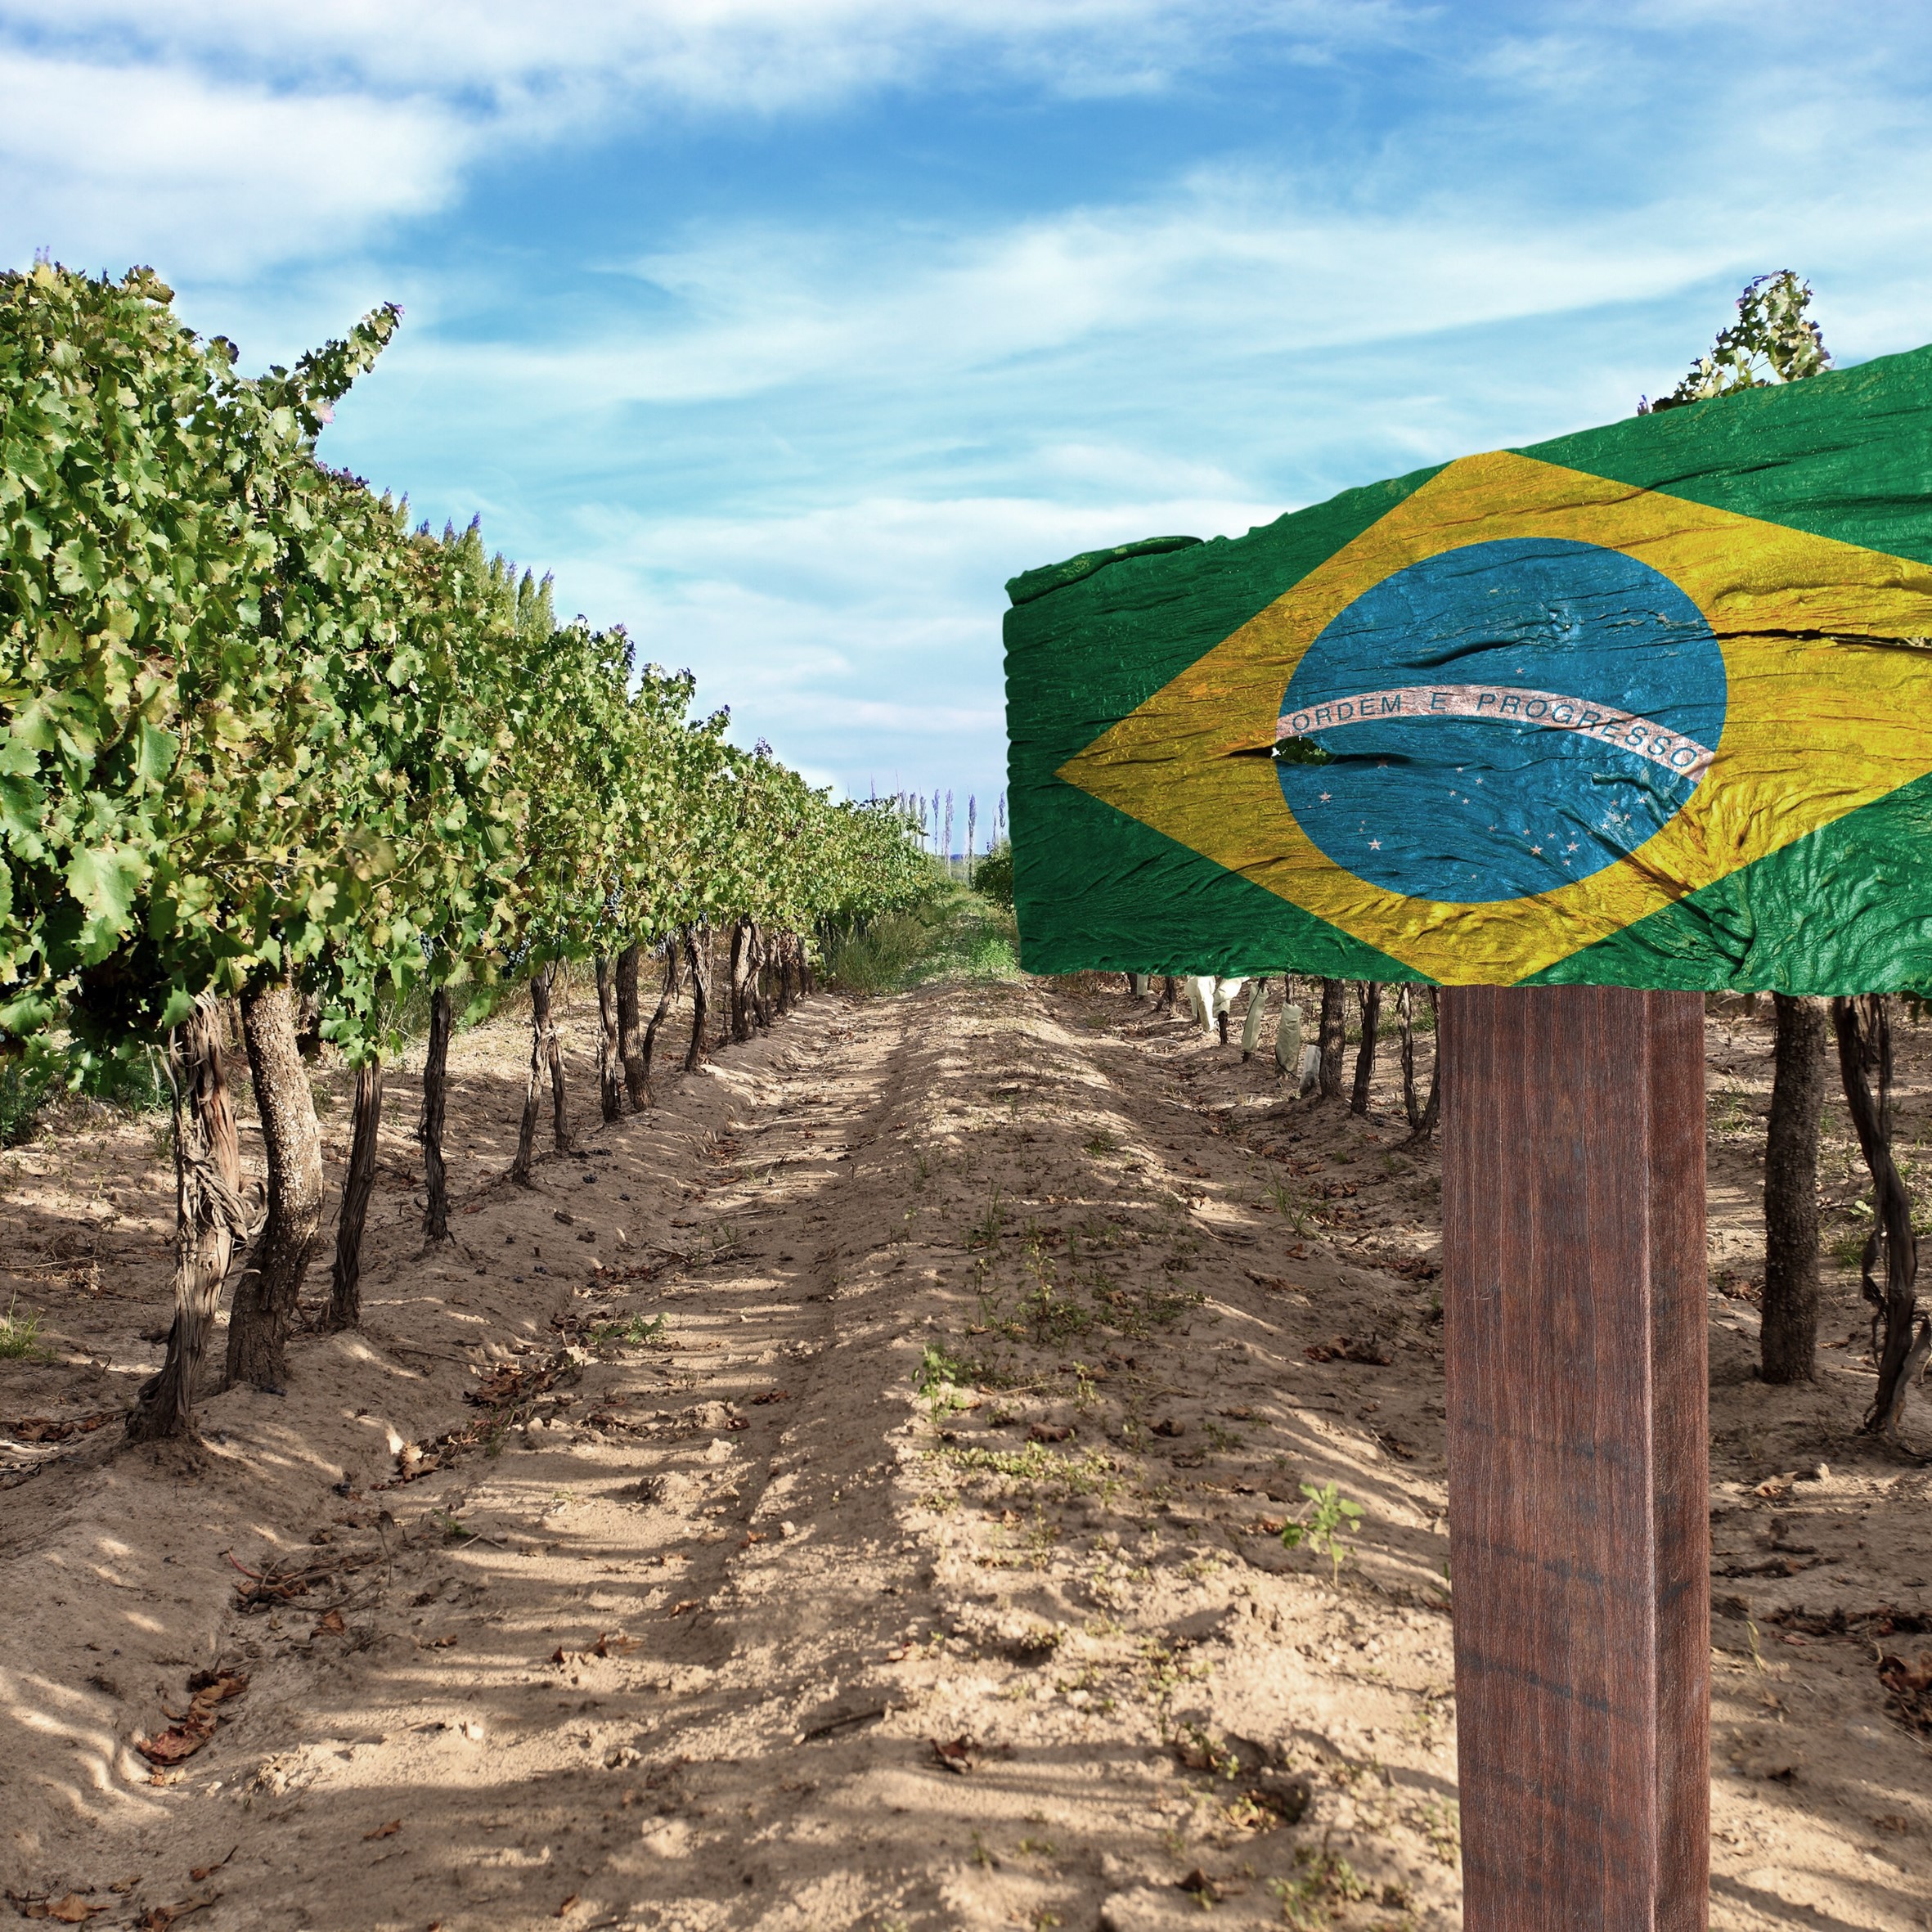 Brazil - Can Italian wine succeed without strong brands